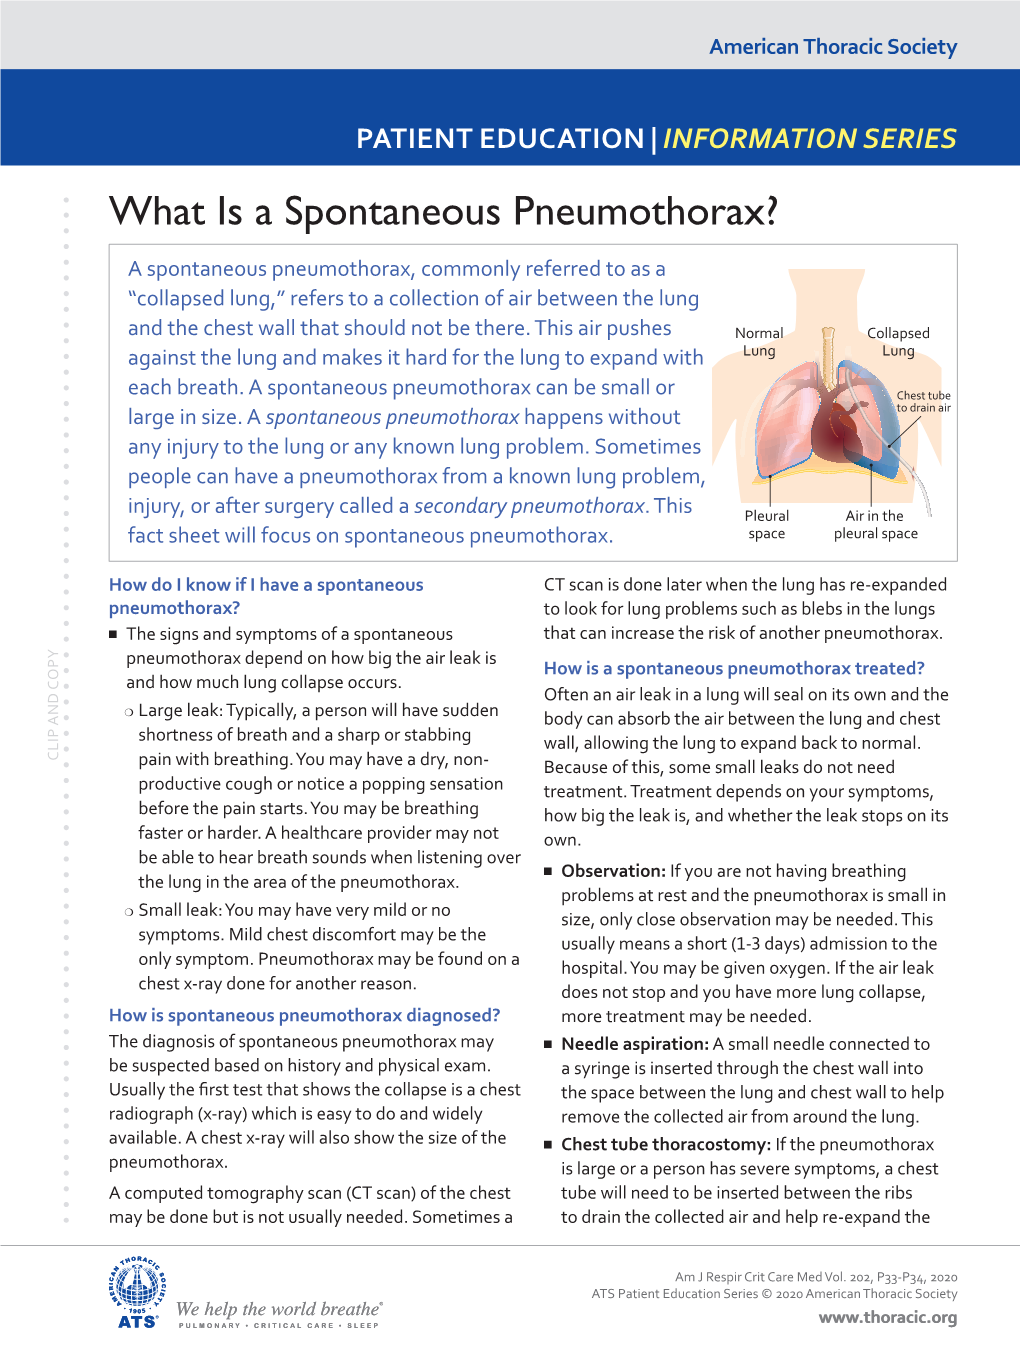 What Is a Spontaneous Pneumothorax?